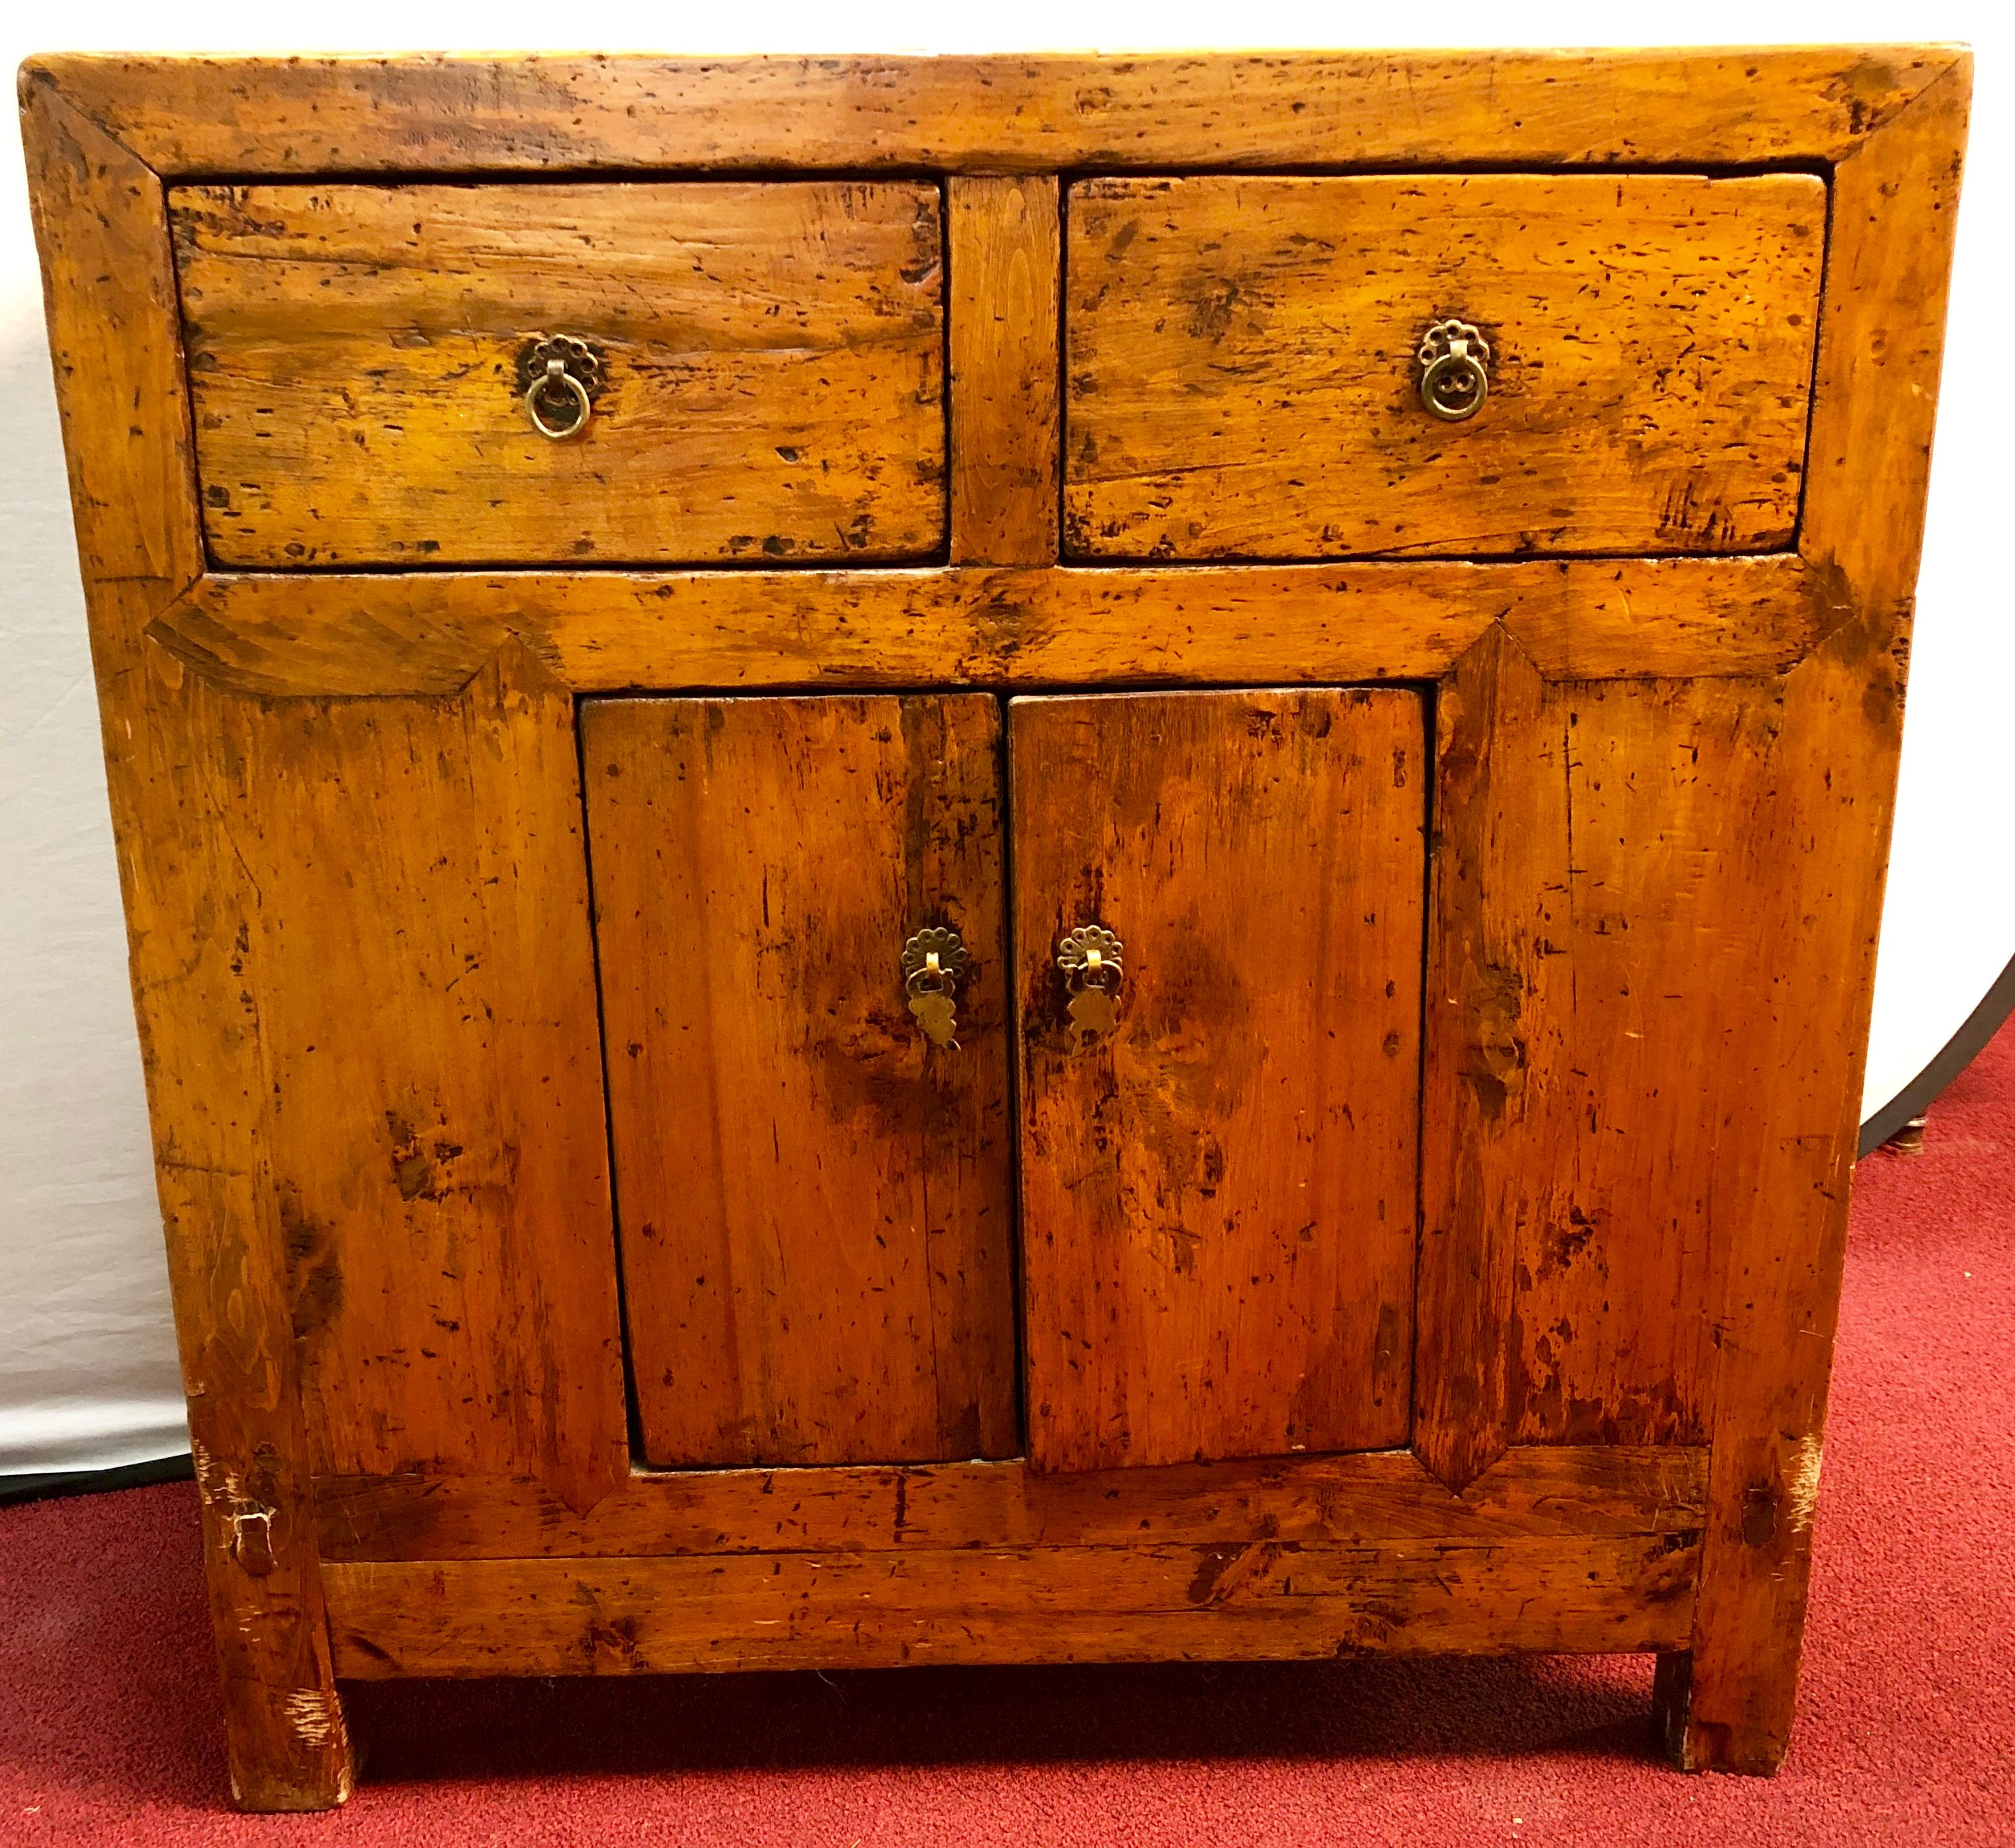 19th century two over two small chest of drawers or nightstand. A lovely chest of drawers having two upper drawers or two-door leading to a shelved interior.

Lia.